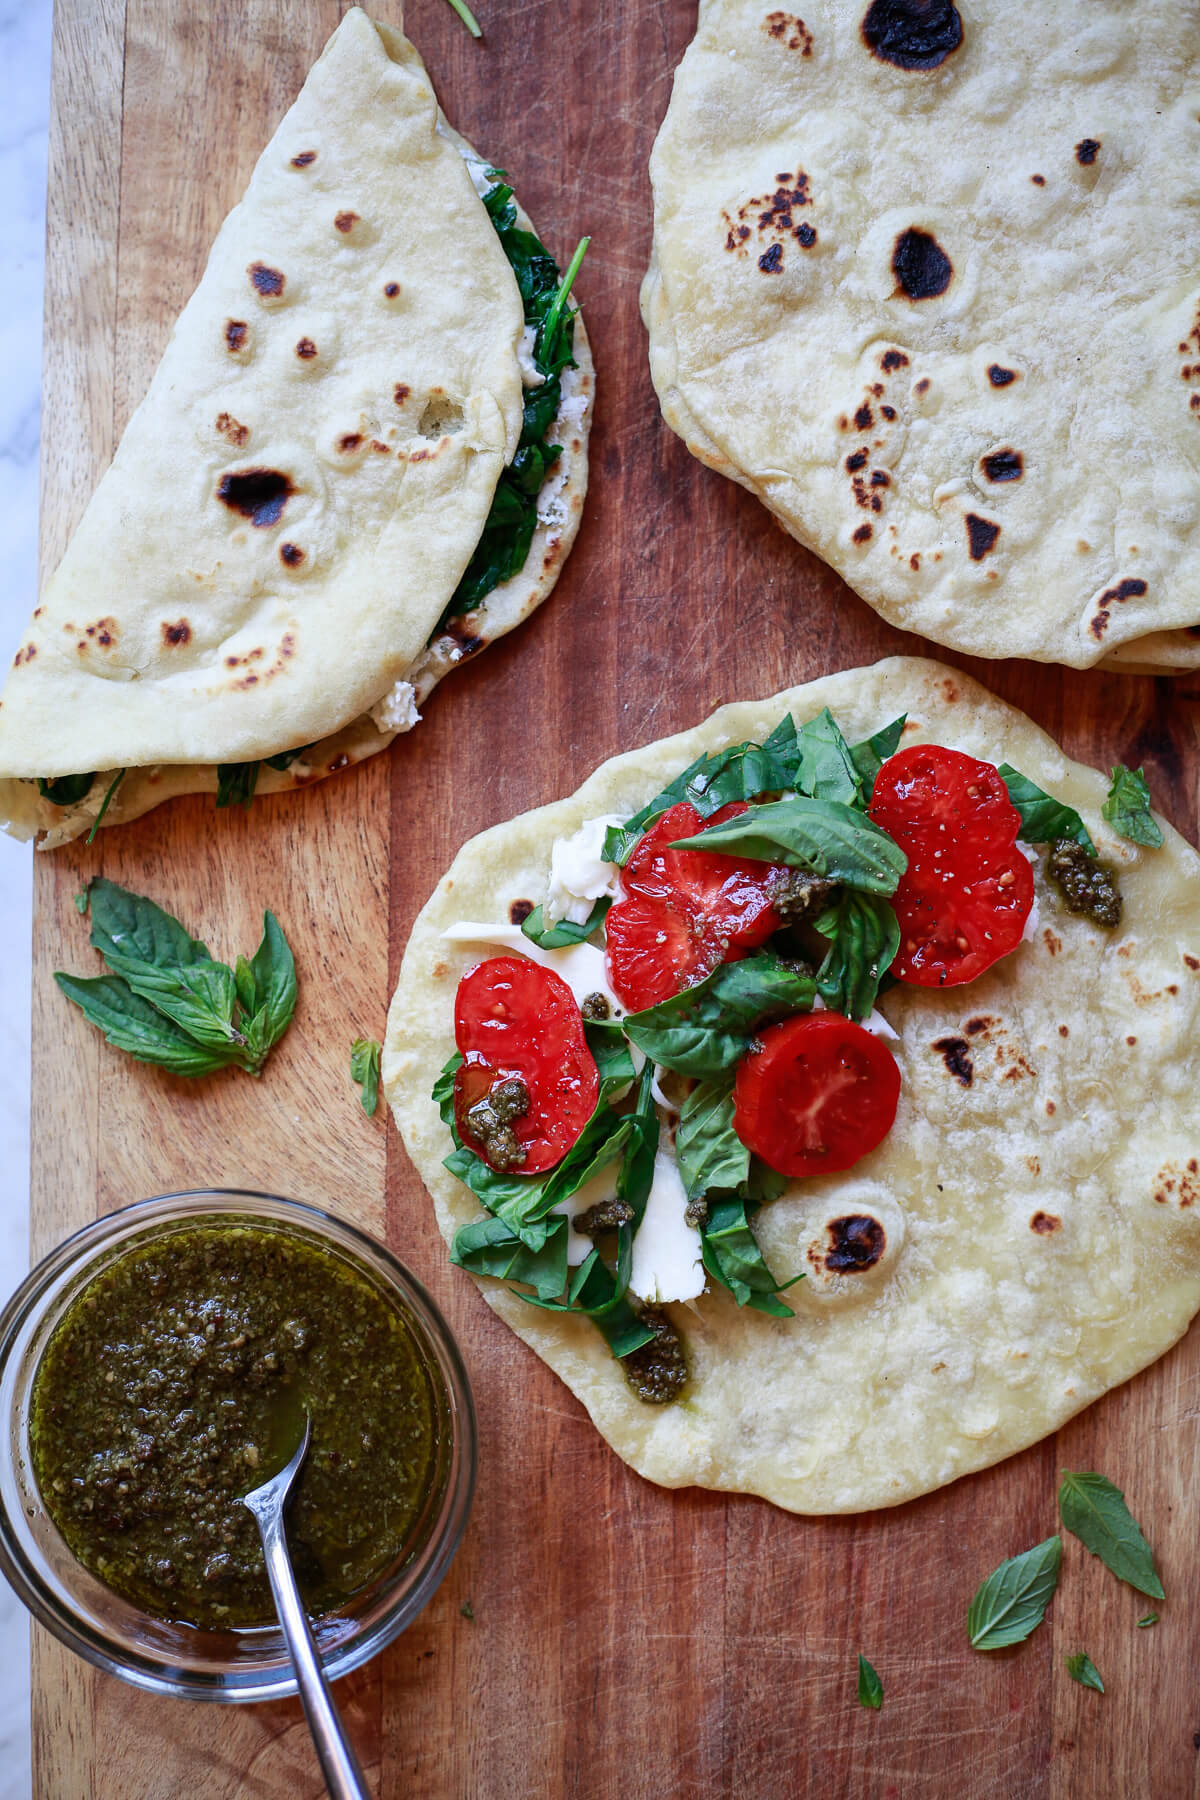 Grilled Piadina Italian flatbread on a cutting board. The flatbreads are topped with mozzarella, tomatoes, and pesto. 